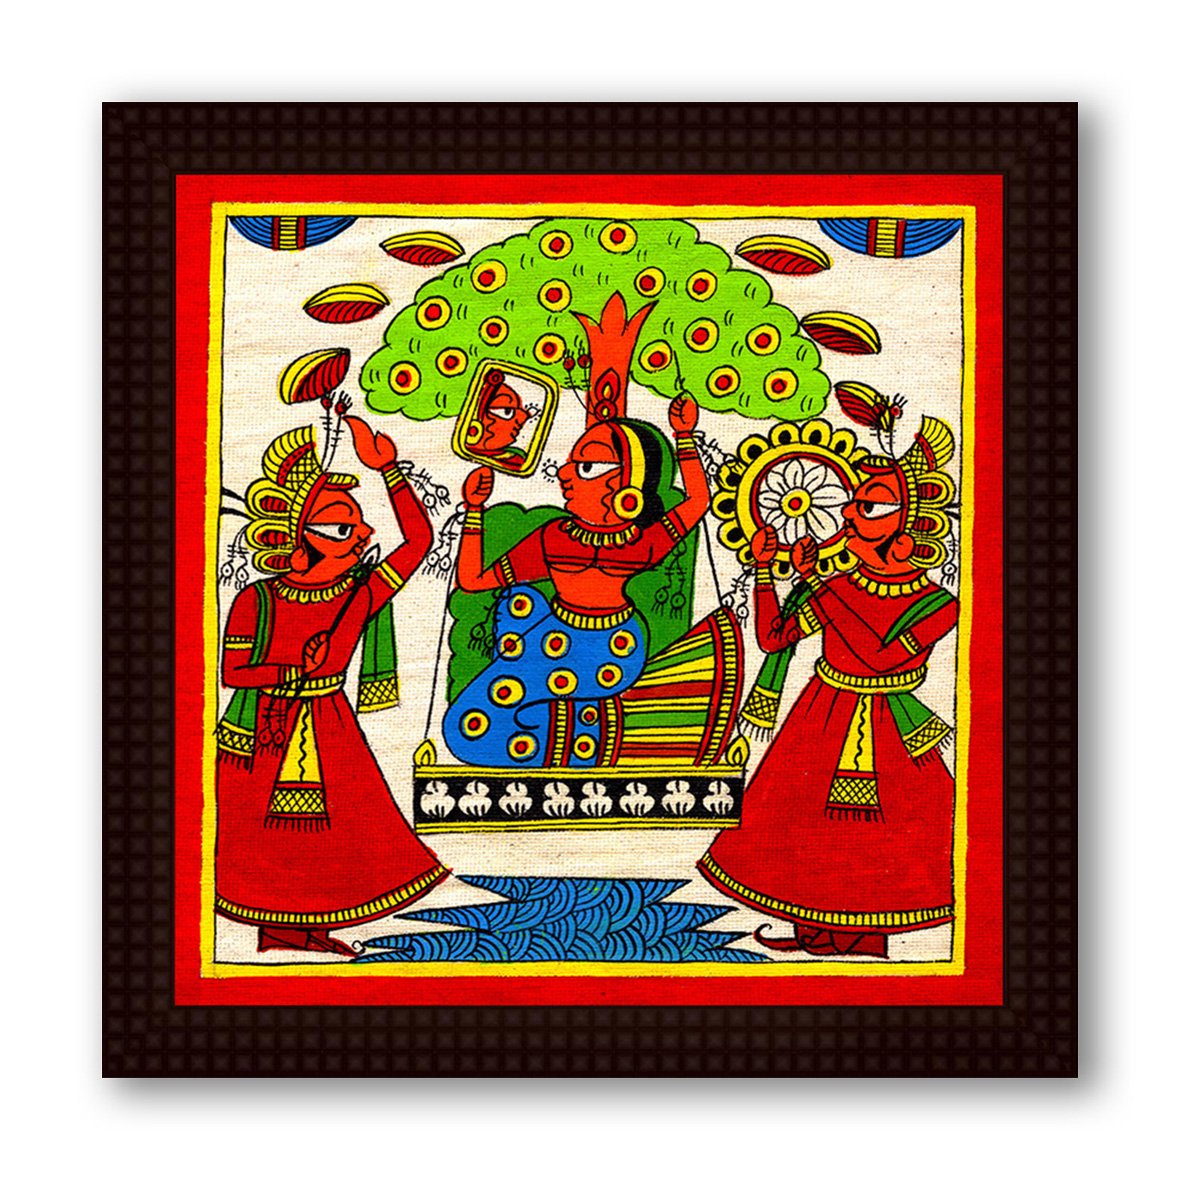 Rajasthani Triditional Painting